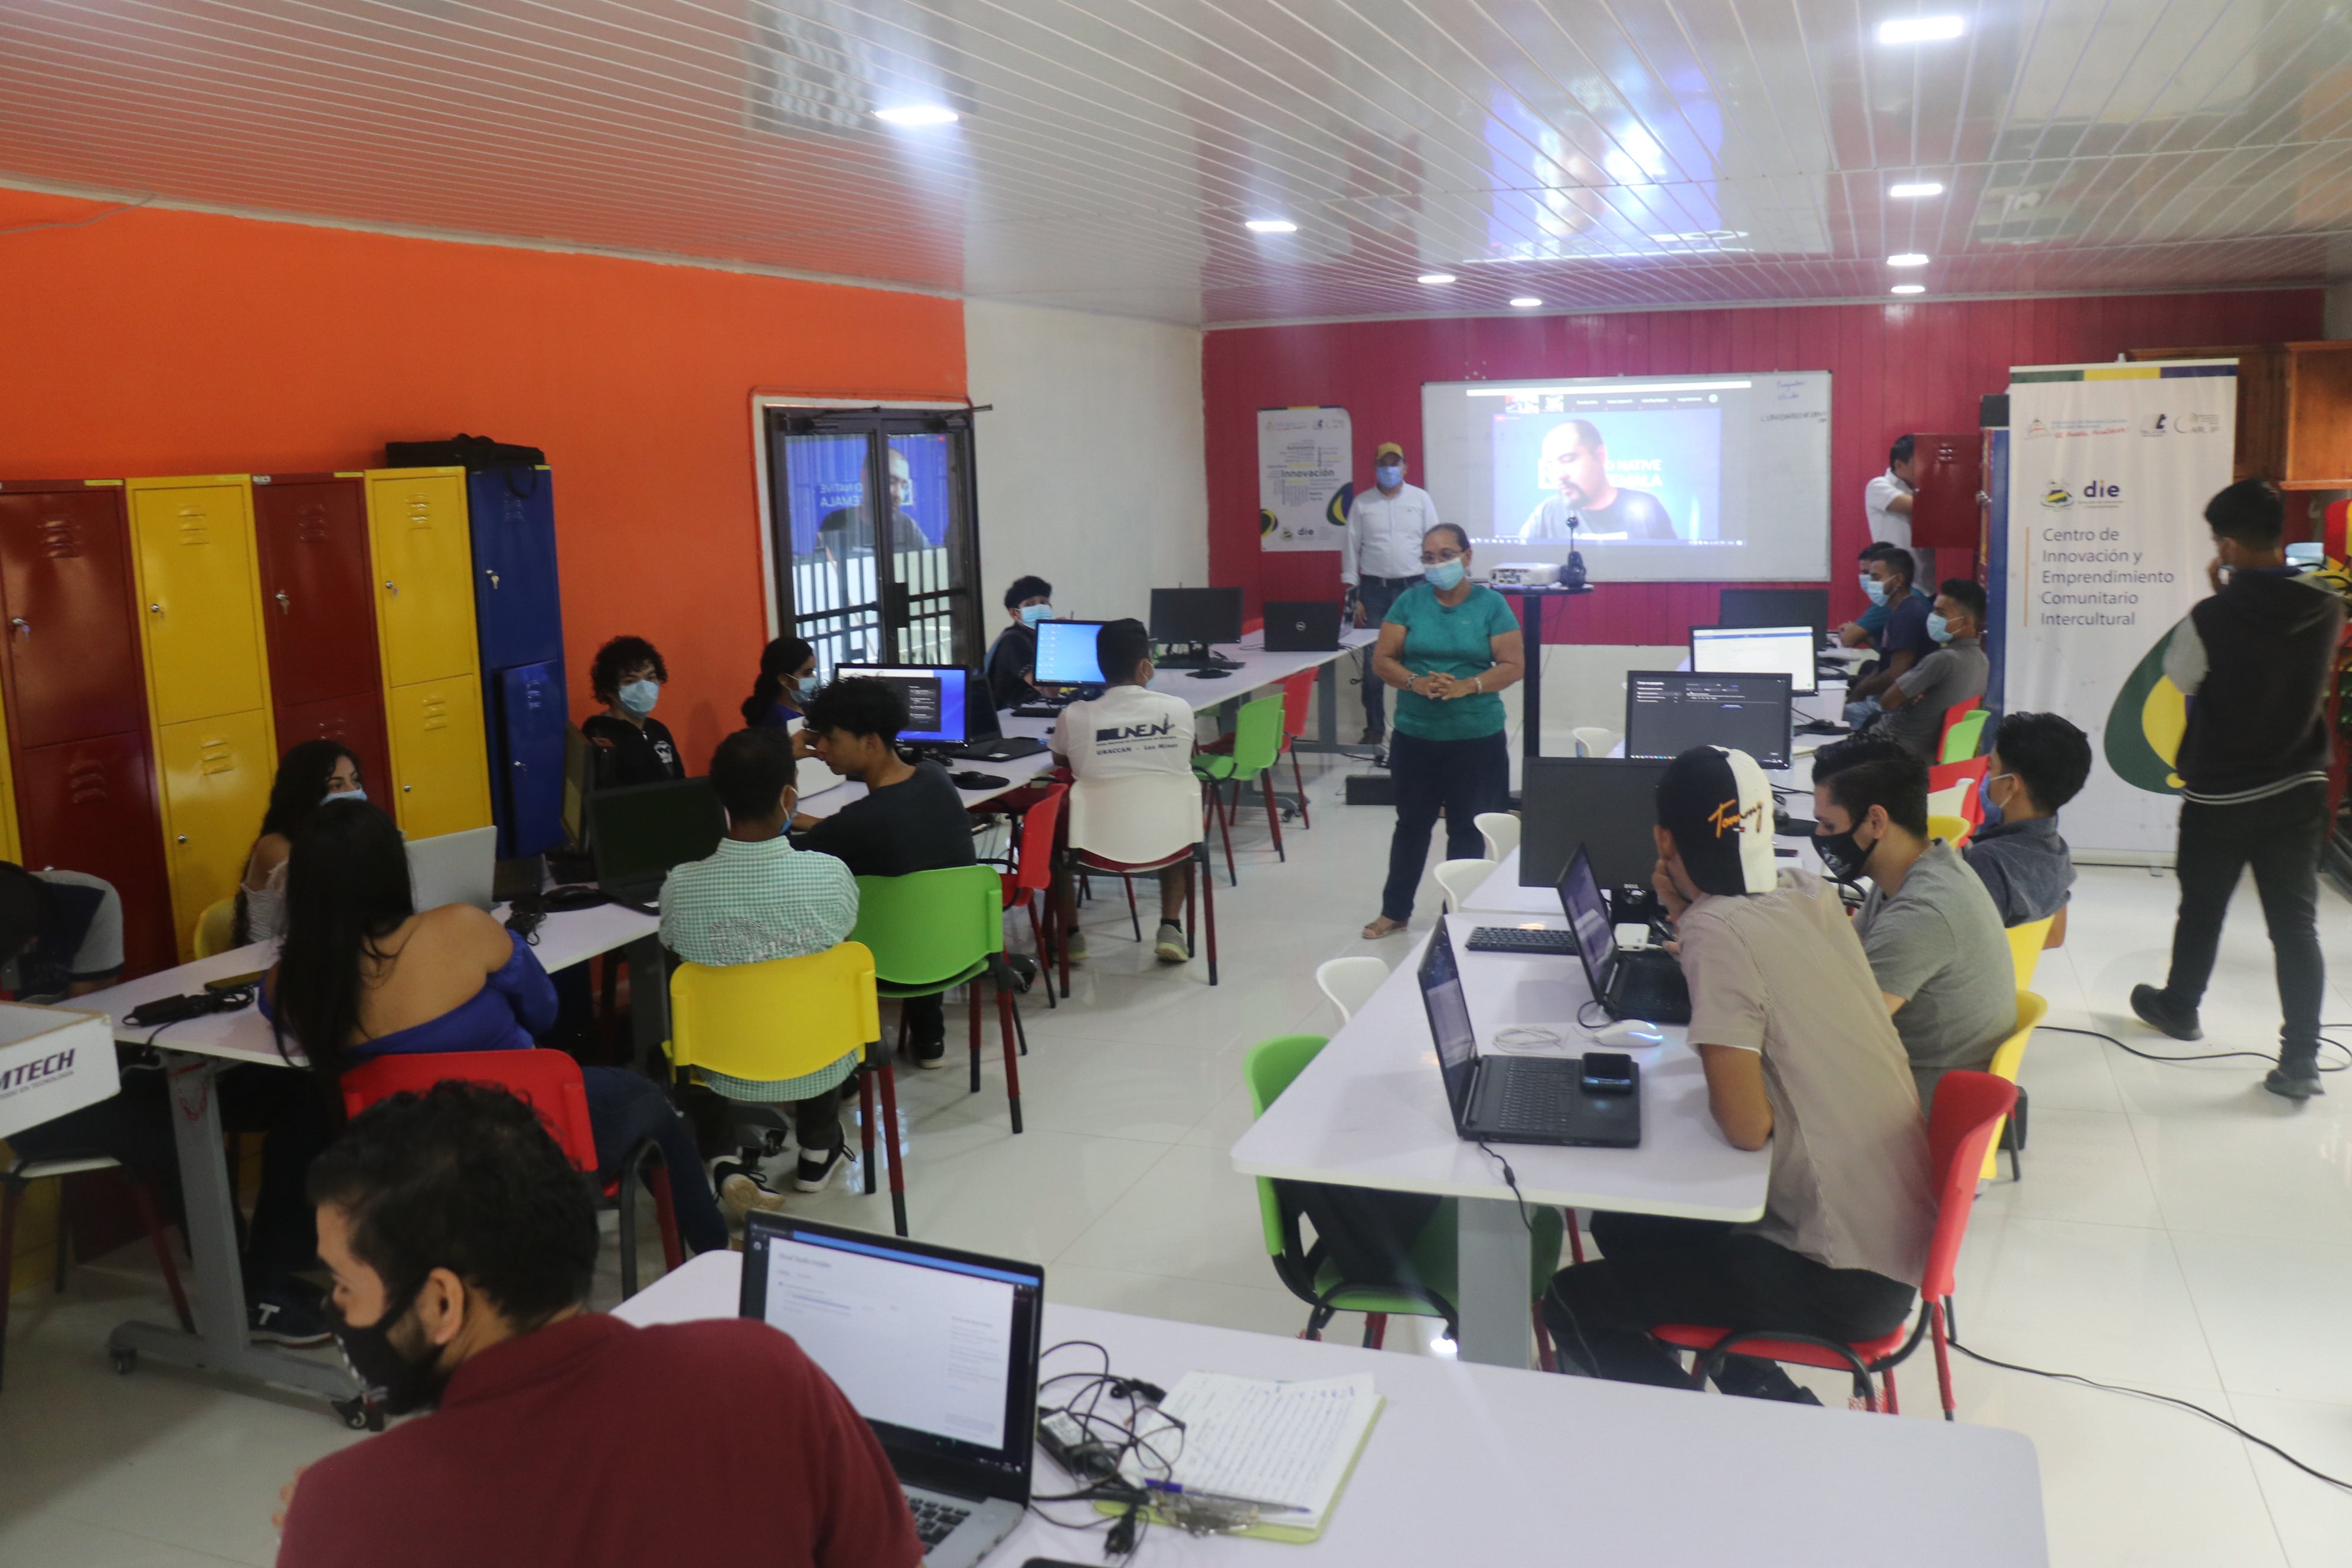 Virtual workshop on the use of new technologies in URACCAN enclosure Las Minas